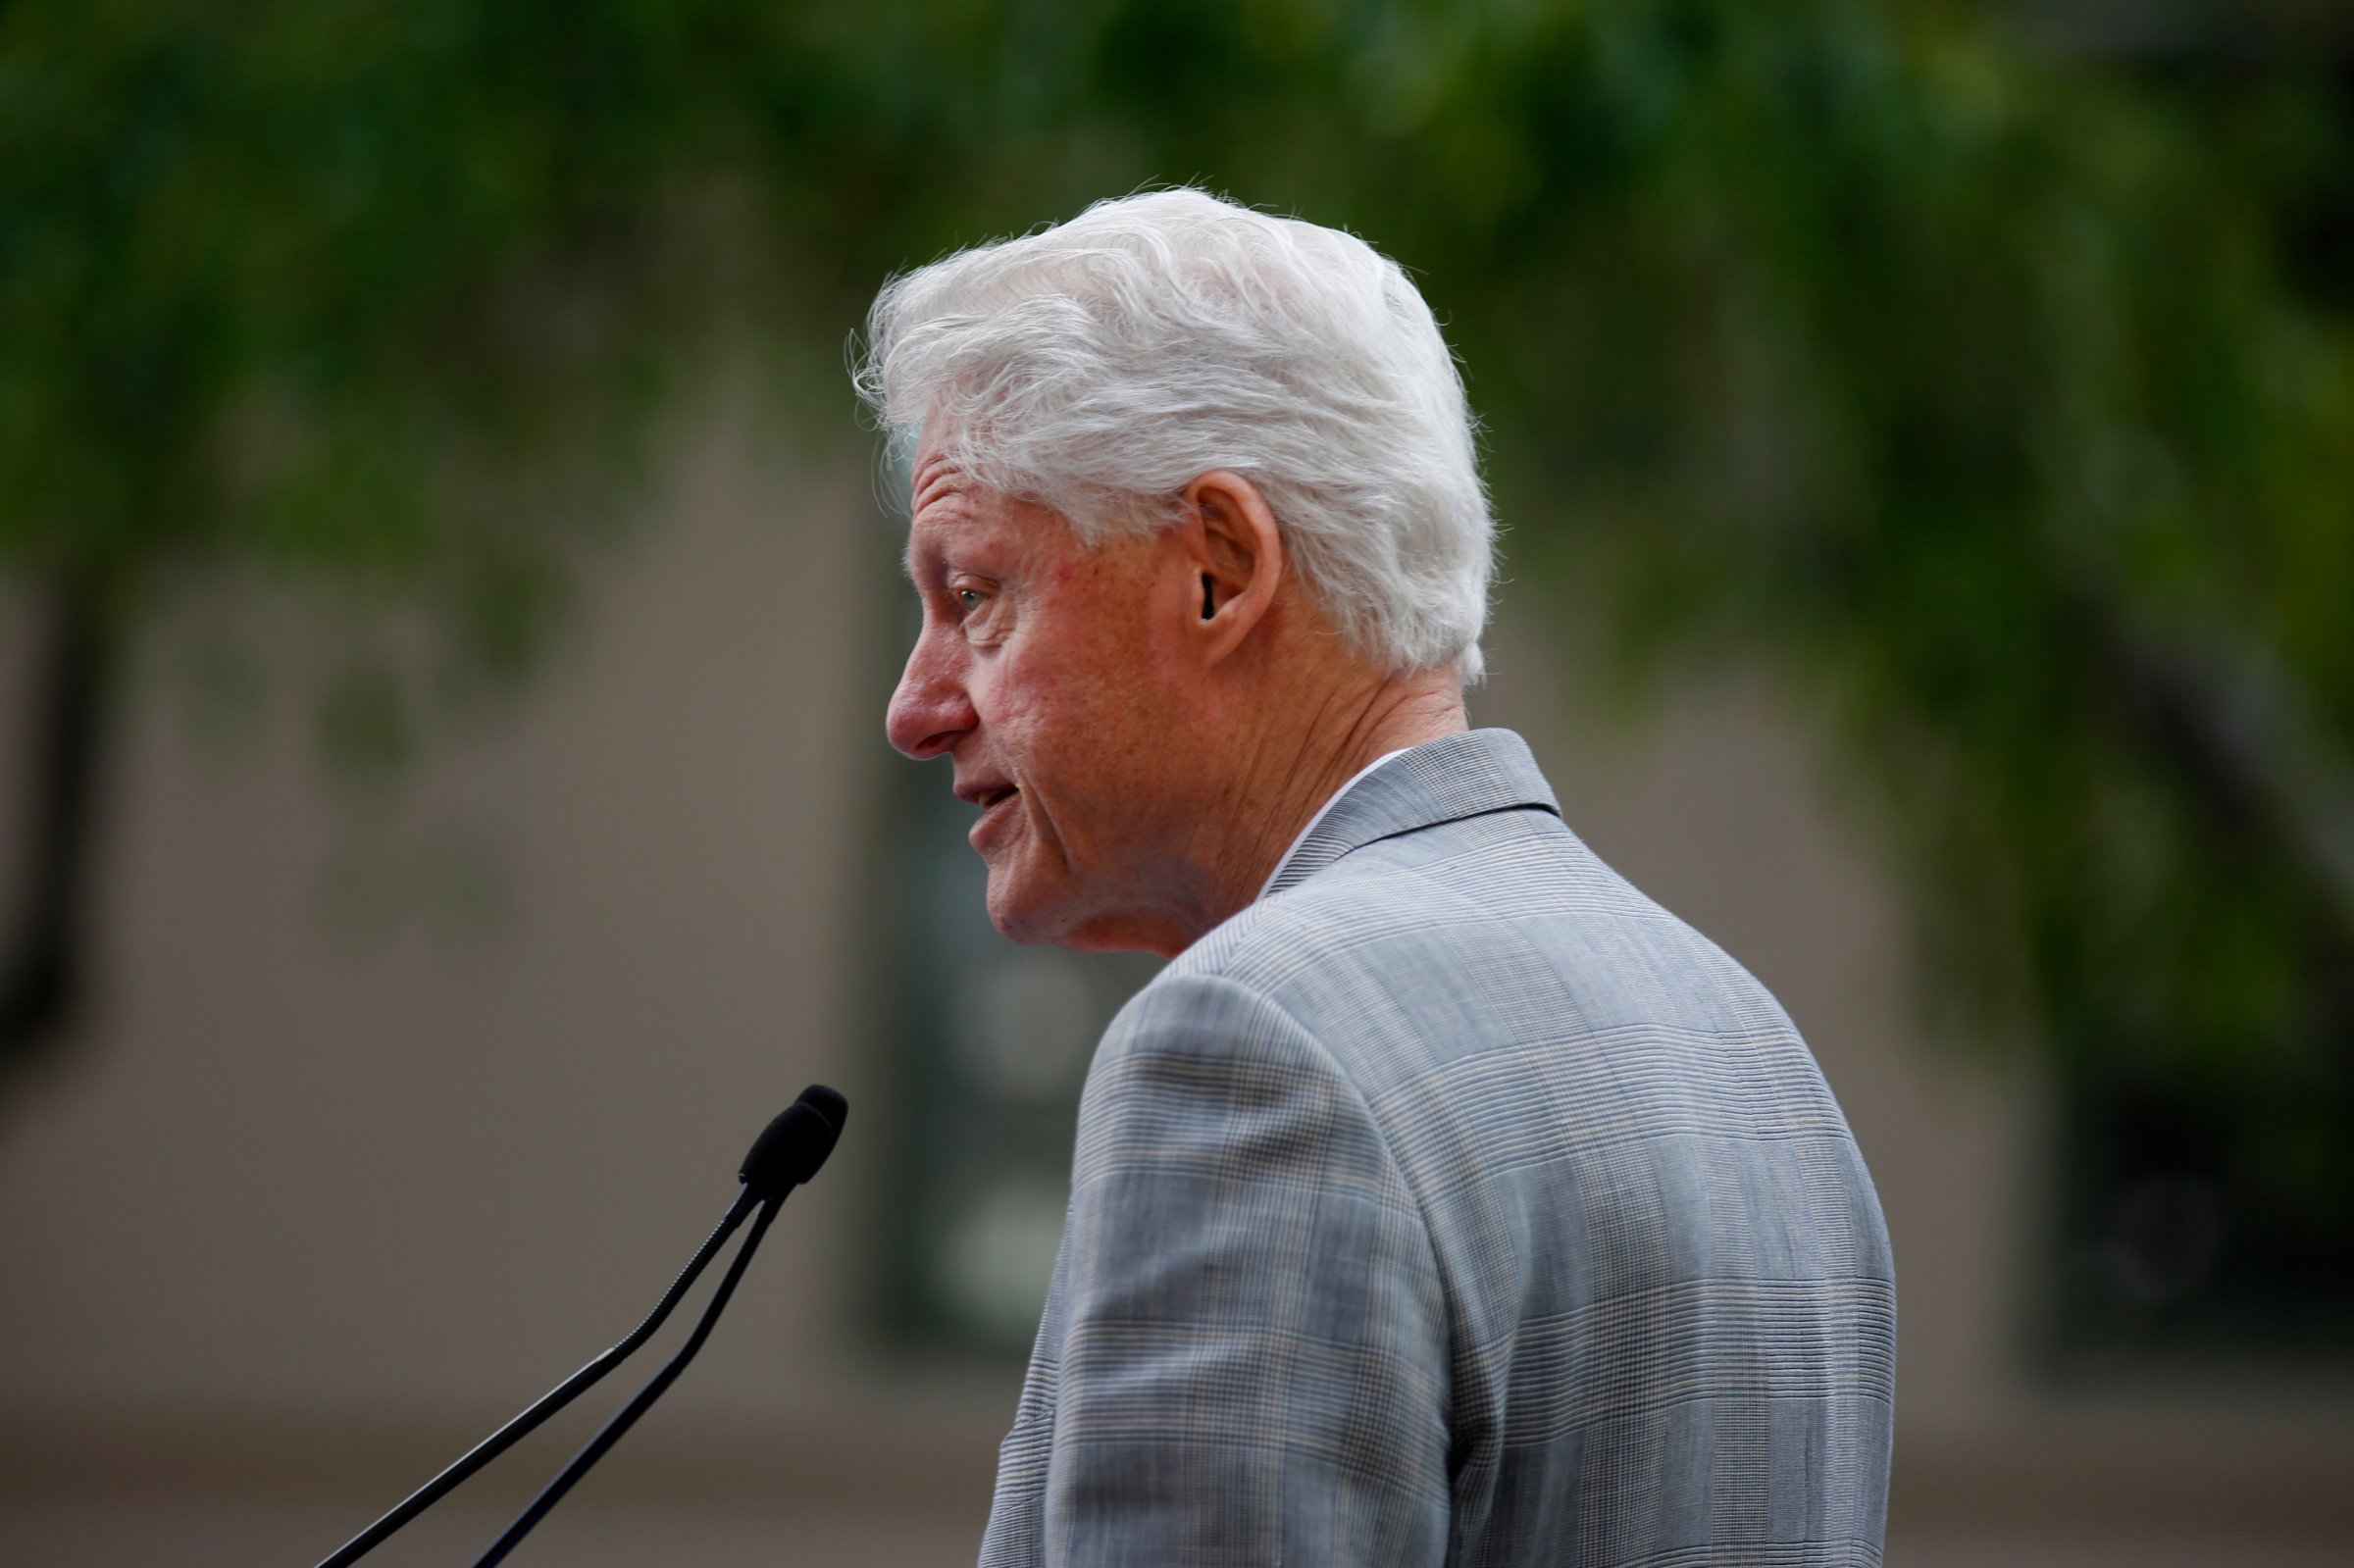 Former President Bill Clinton stumps for Democratic presidential candidate Hillary Clinton at the Los Angeles Trade - Technical College April 3, 2016 in Los Angeles, California.